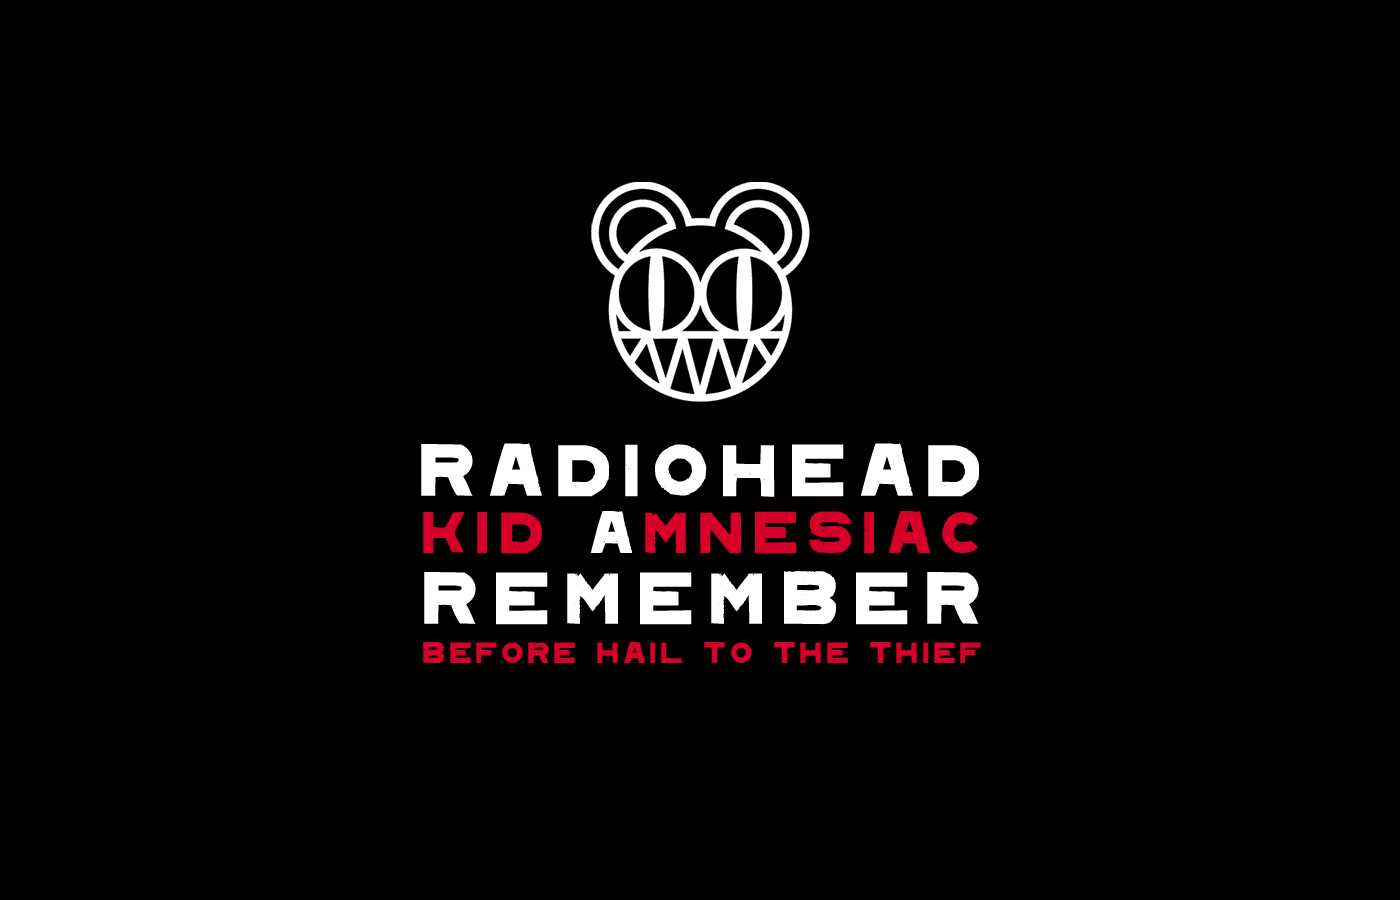 Radiohead Remember by pascalmabille on DeviantArt